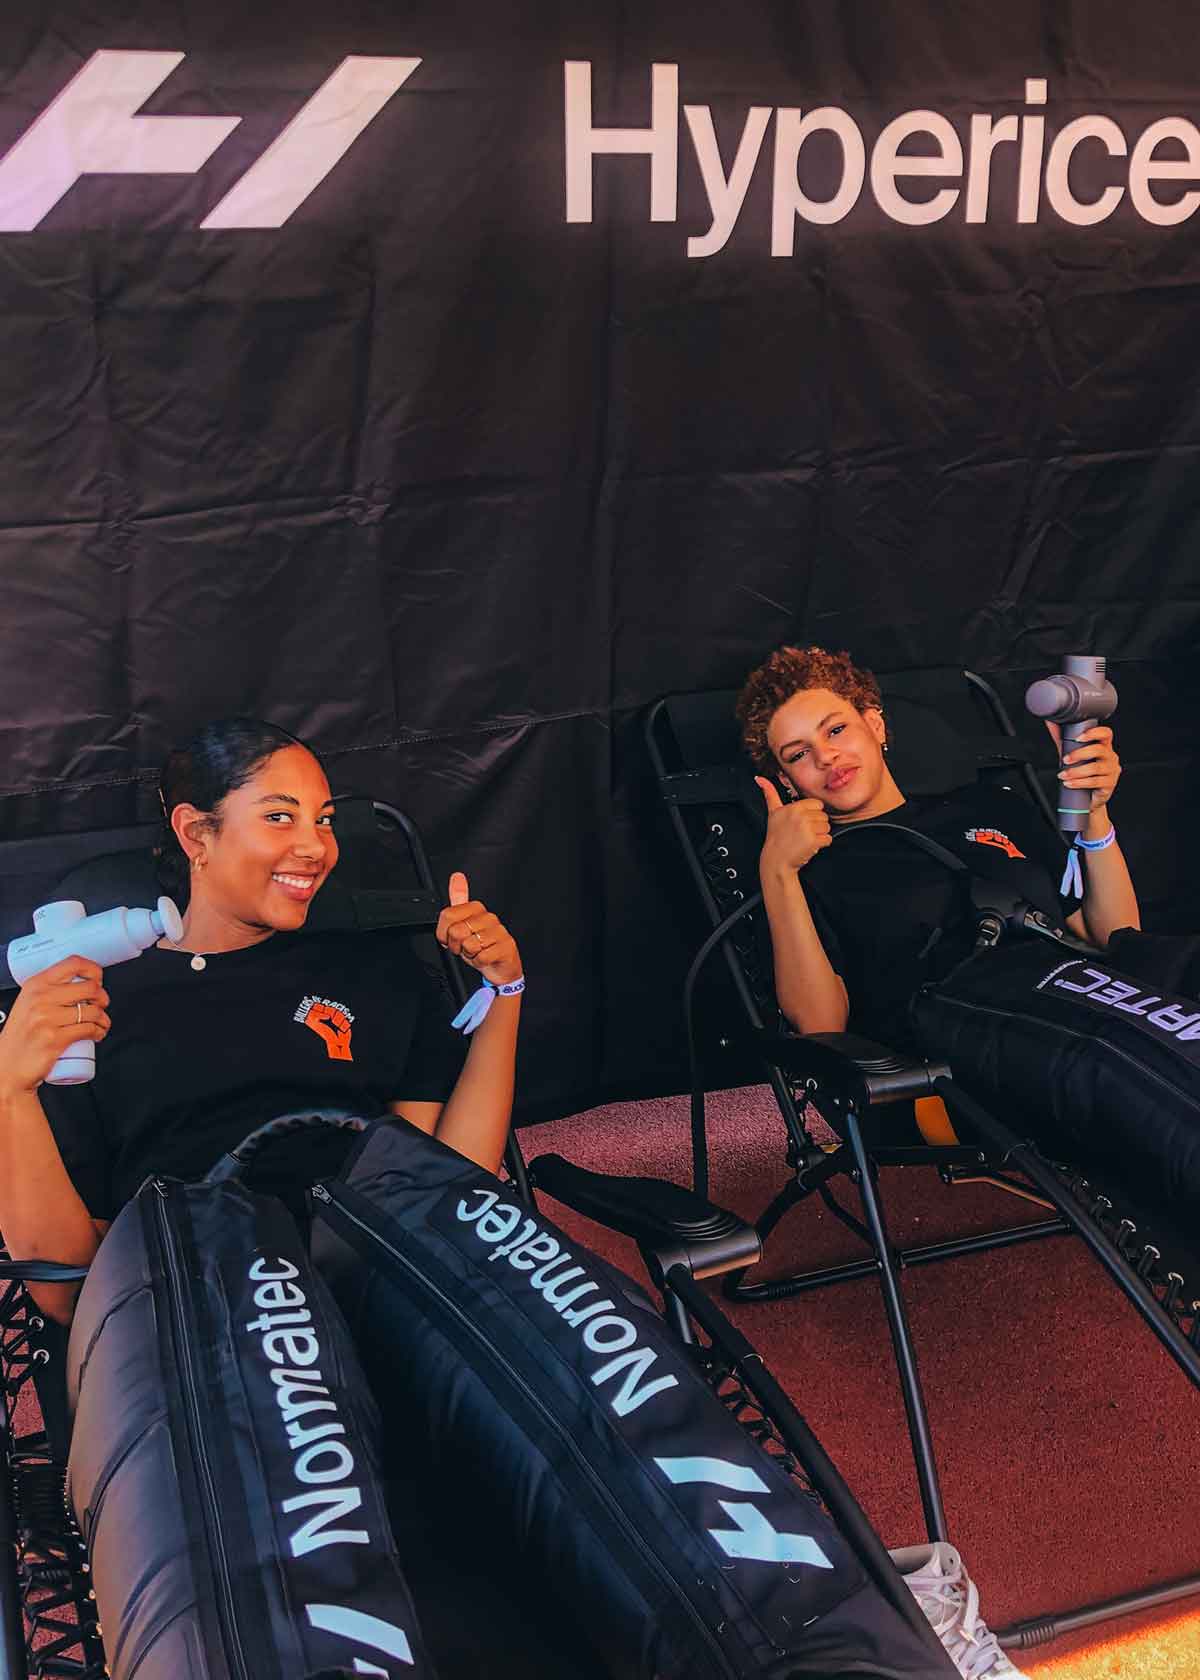 Rehab at the Hyperice tent